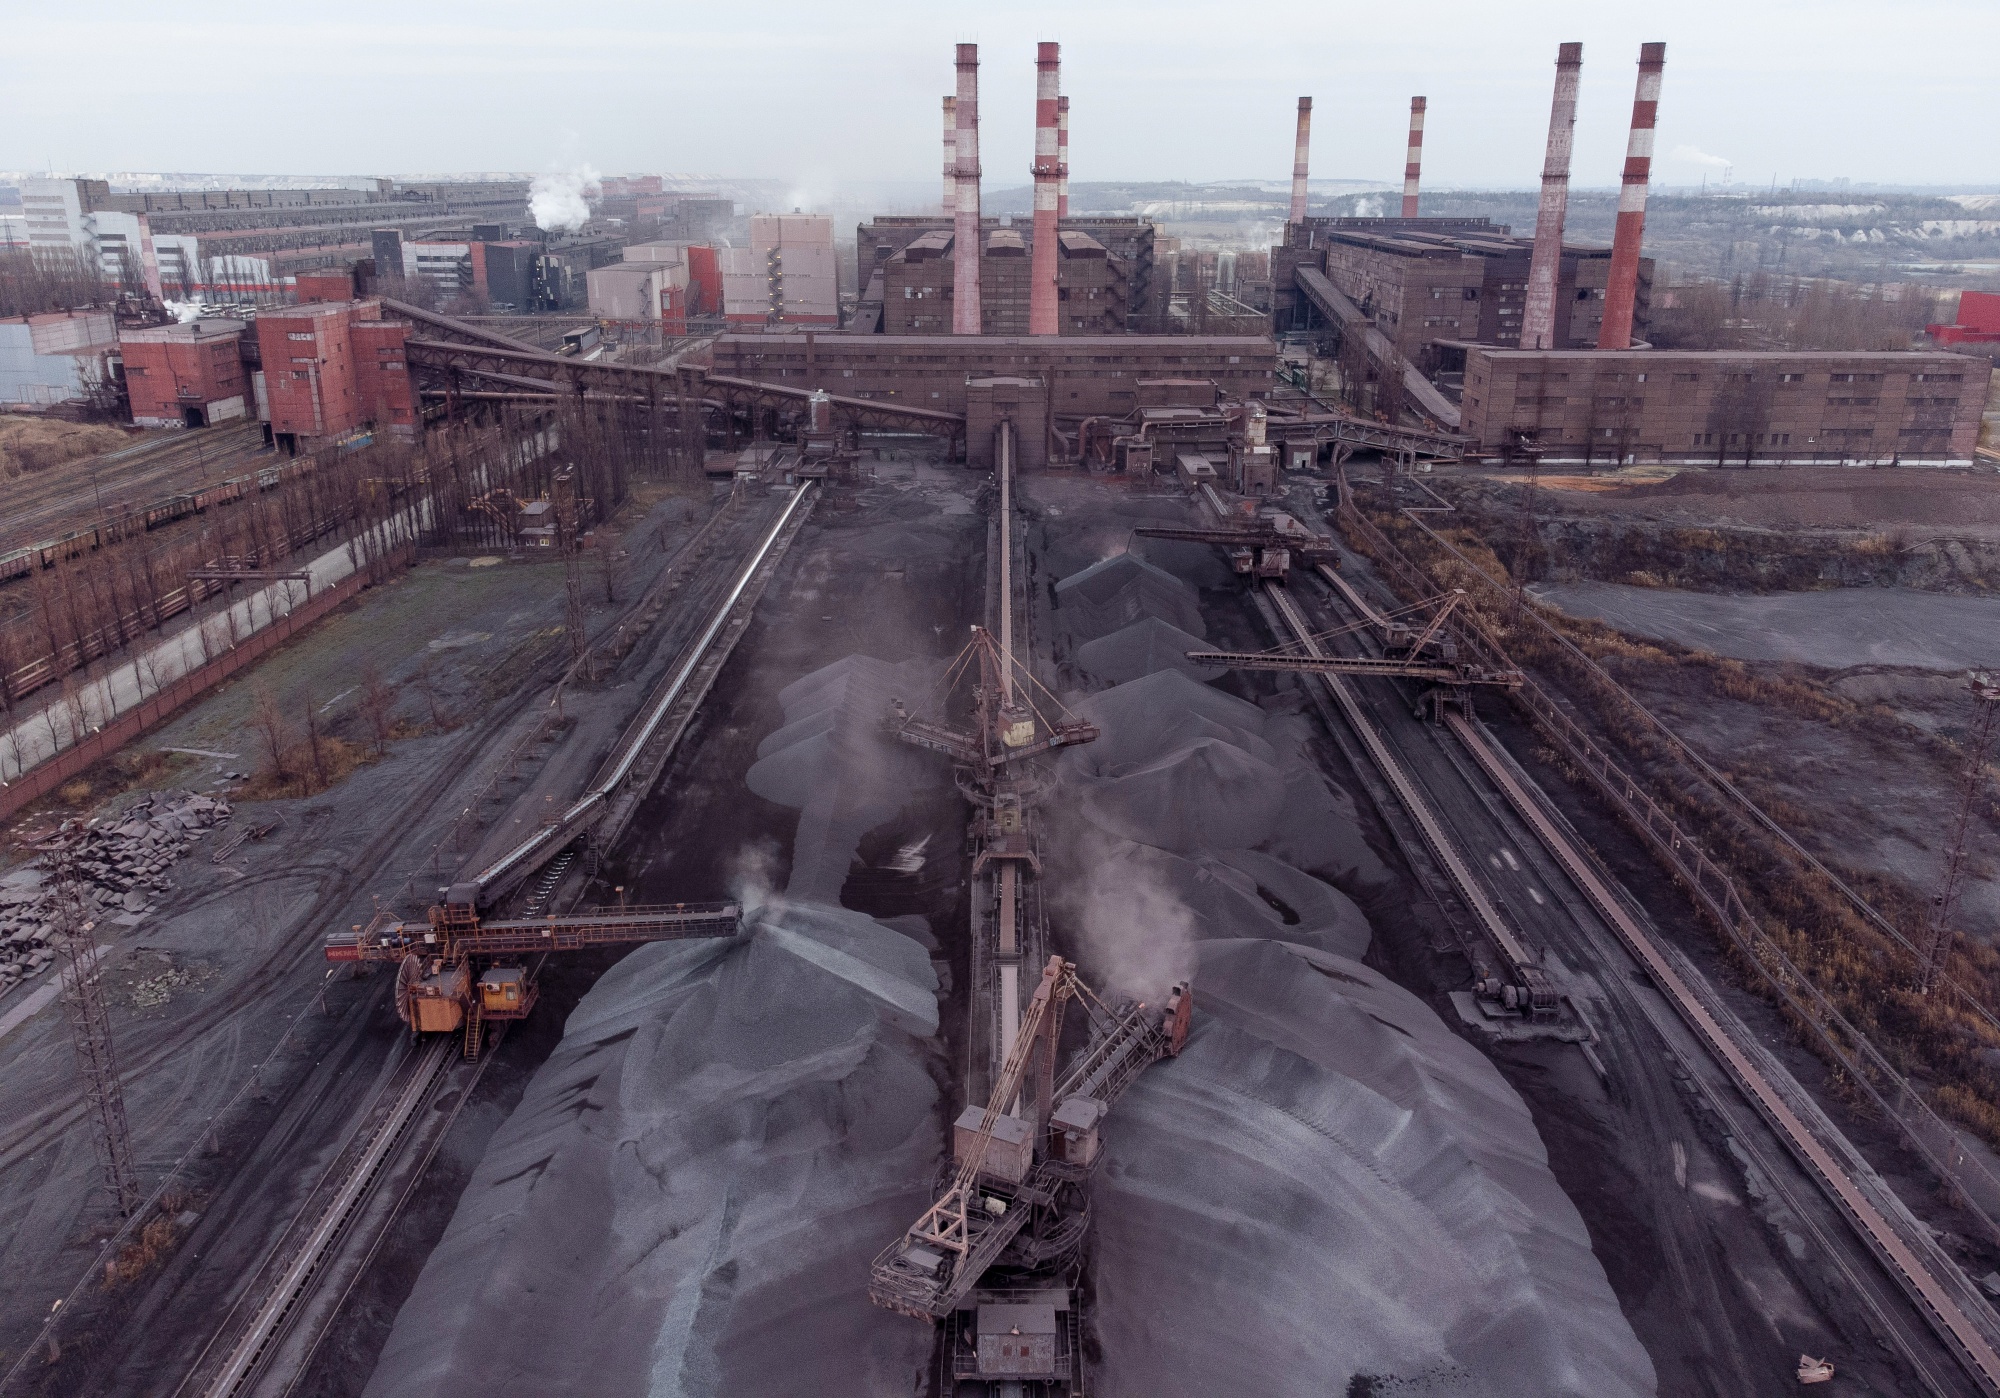 The Metalloinvest Holding Co. Lebedinsky iron ore mining and processing plant in Gubkin, Russia.